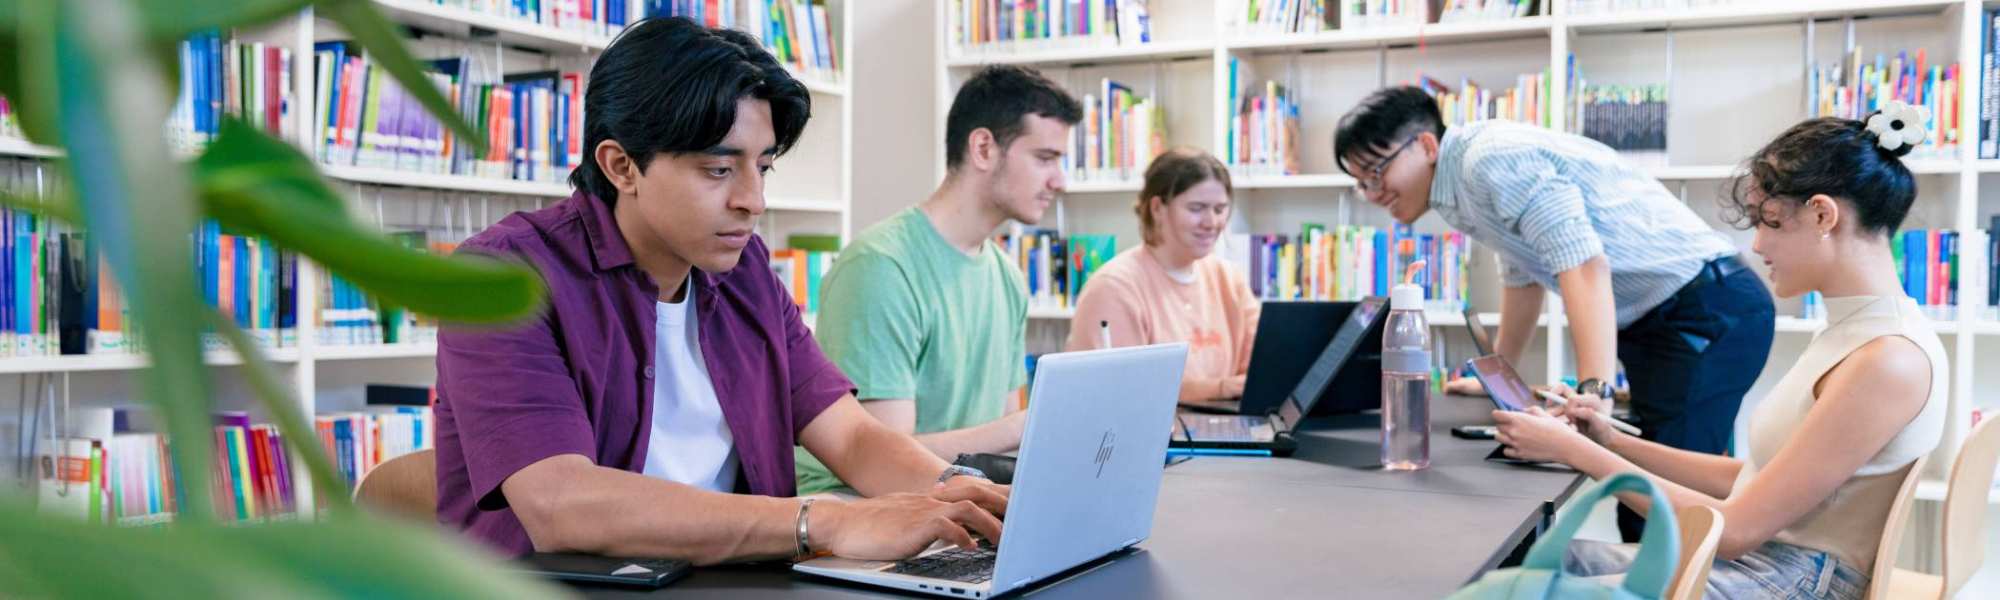 edd5828e-5973-11ee-ac0e-024215b4a989 International students Diego, Tam, Nyugen, Noa and Andrei studying in the library at the Arnhem campus of HAN University of Applied Sciences.